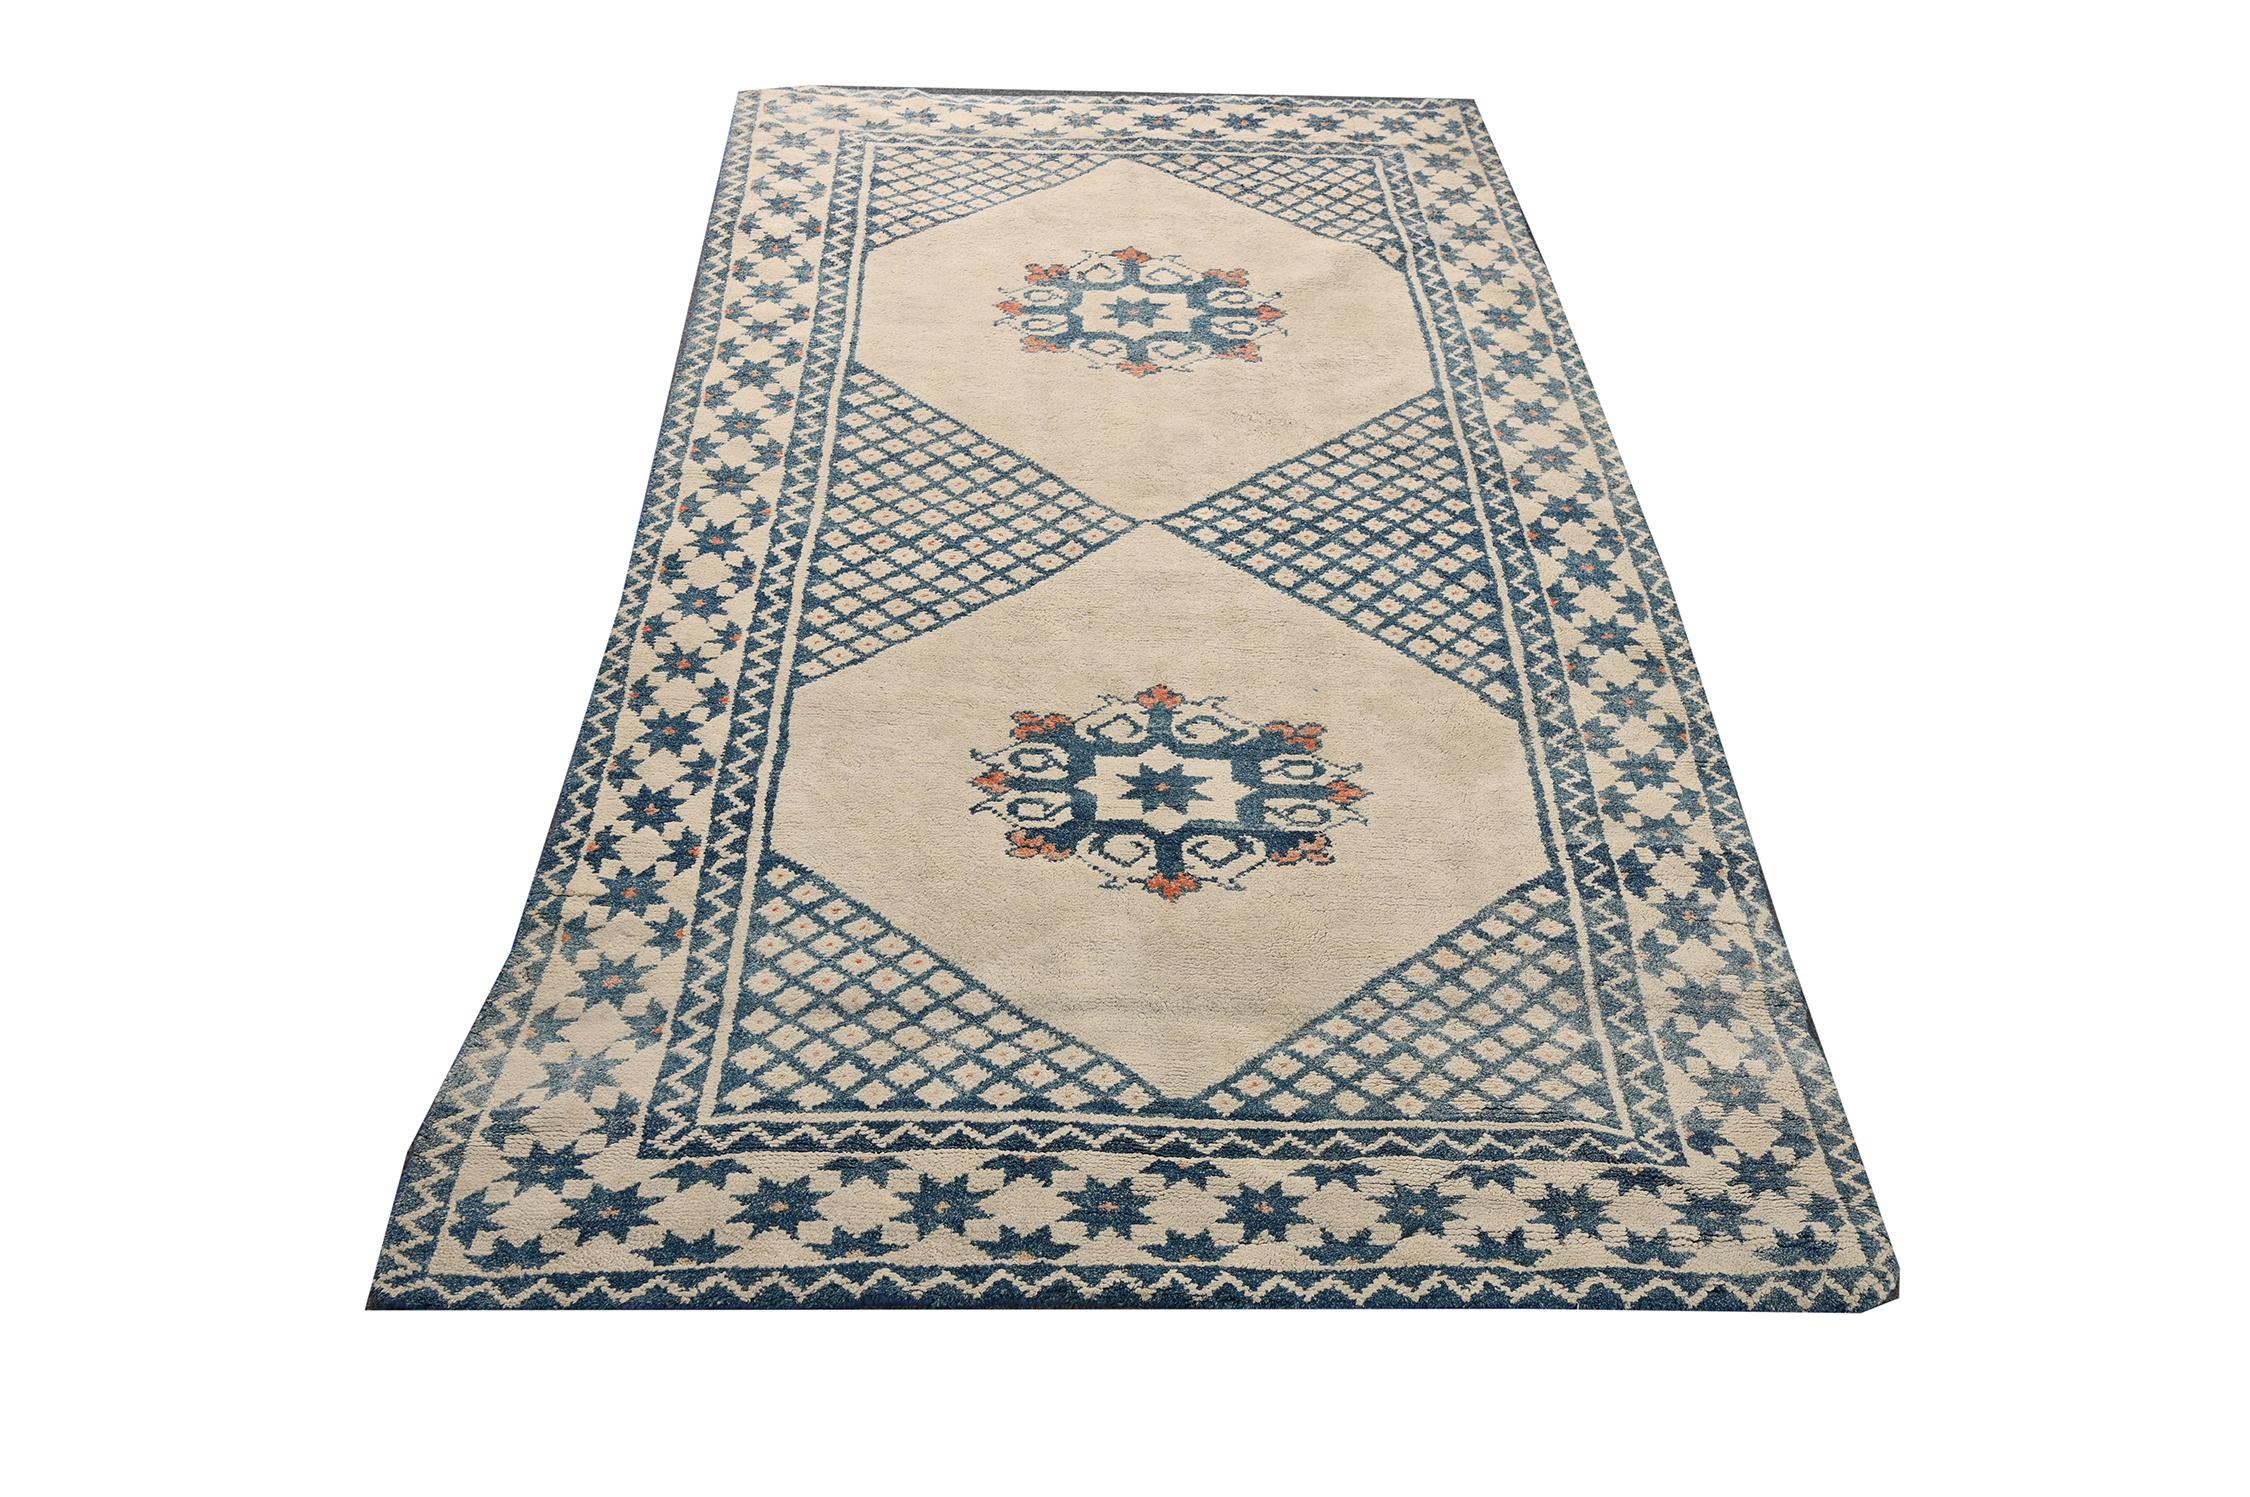 This vintage 5x8 Dhurrie is an exciting new entry in Rug & Kilim's esteemed flat weave collection. Handwoven in cotton, it originates from India circa 1950-1960. 

Further on the Design:

This flat weave prefers medallions and geometric patterns